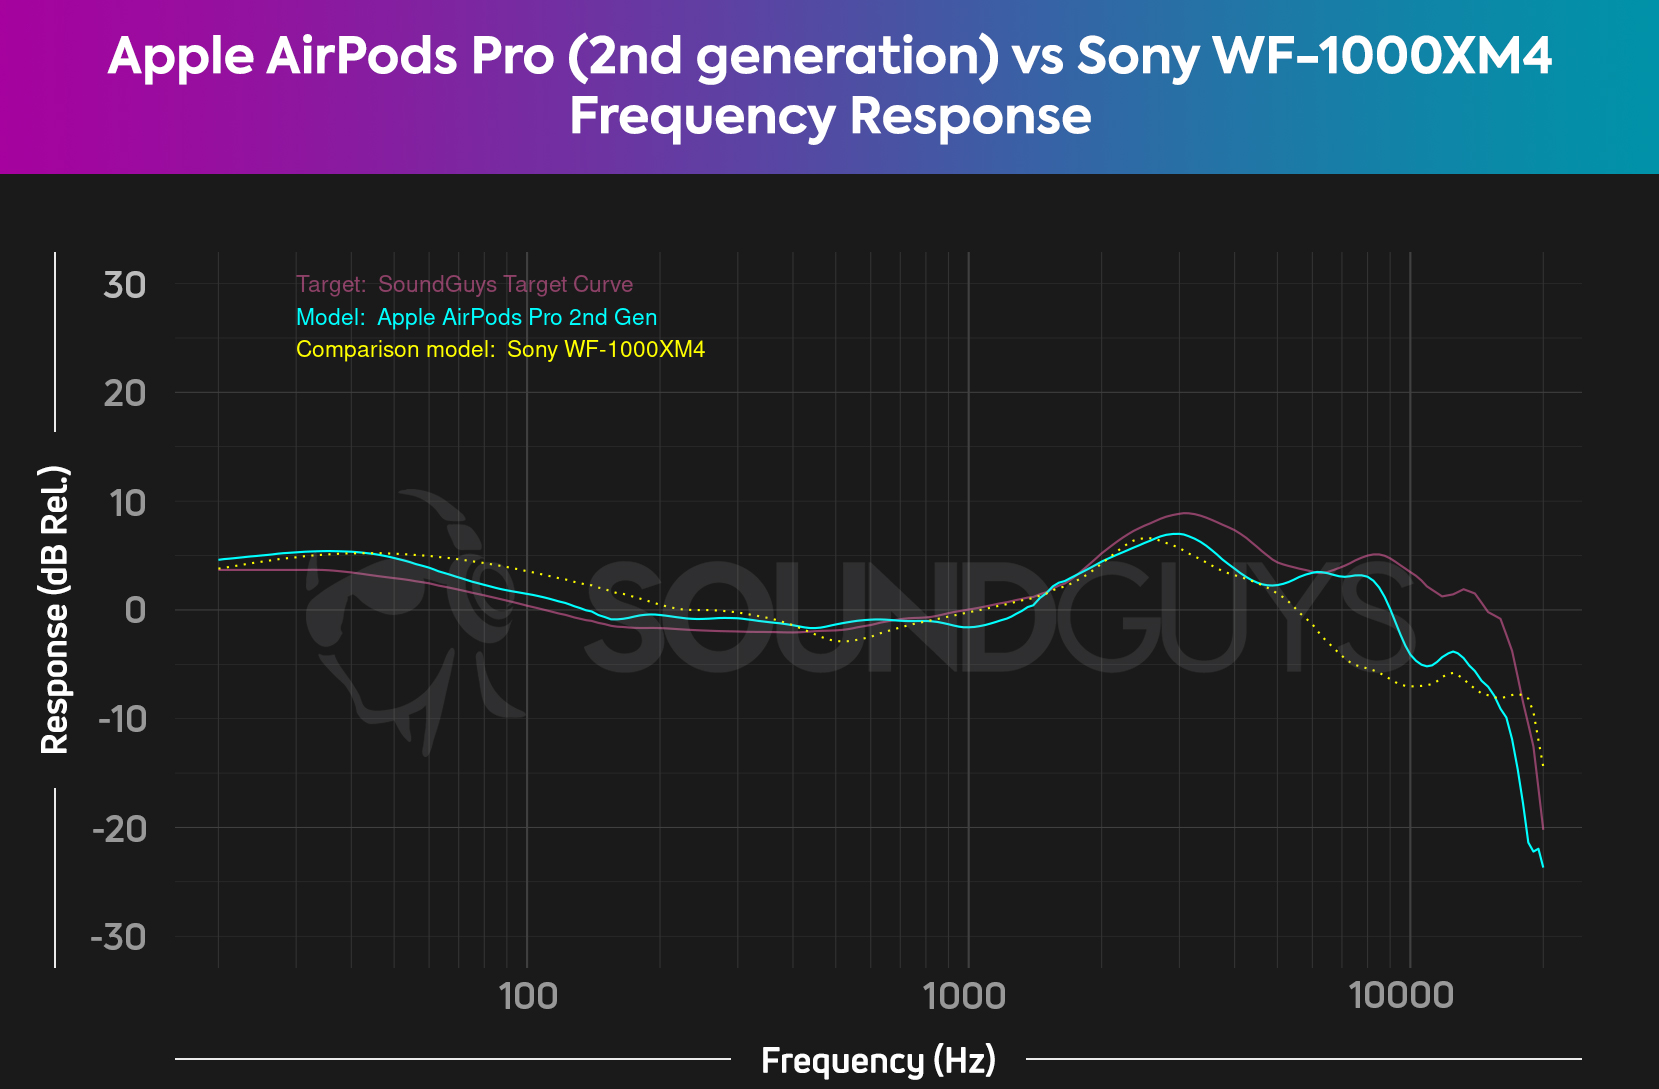 A chart compares the AirPods Pro (2nd gen) and Sony WF-1000XM4 frequency responses to reveal the AirPods Pro's is more consistent.